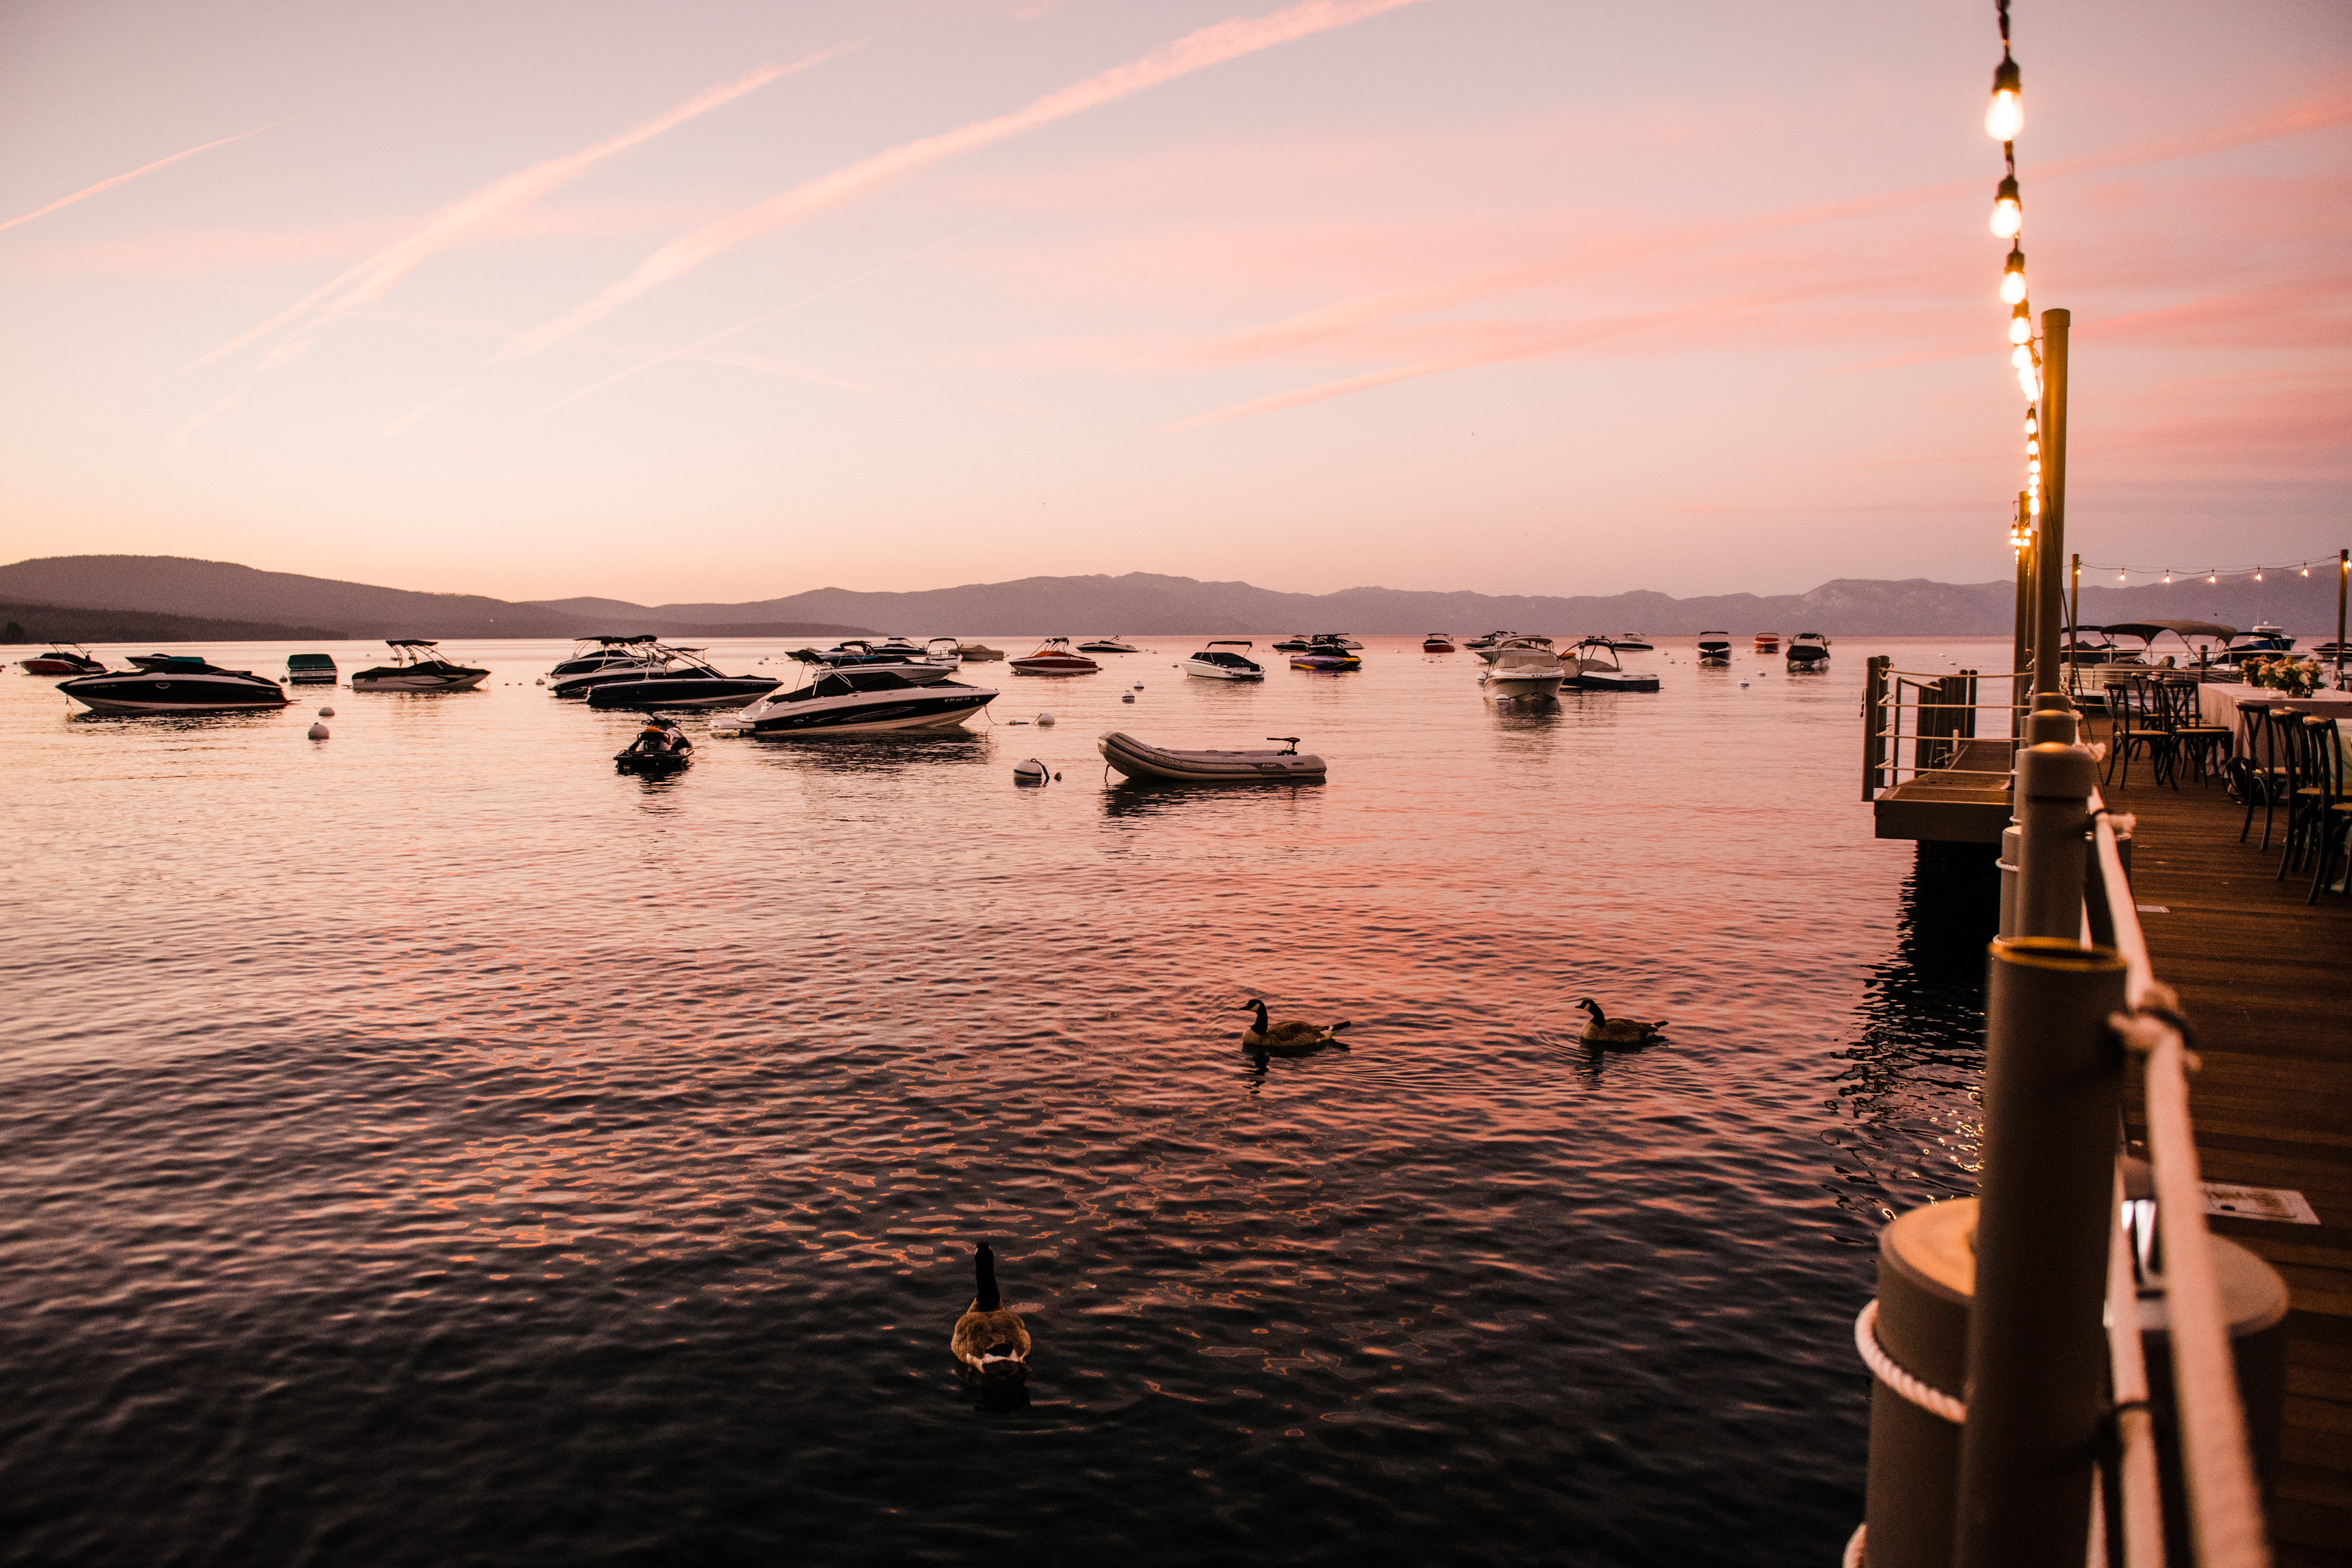 A view looking down the West Shore Cafe pier toward Lake Tahoe. There are three geese, and boats in the foreground. The sunset is pink and blue. Custock Photography